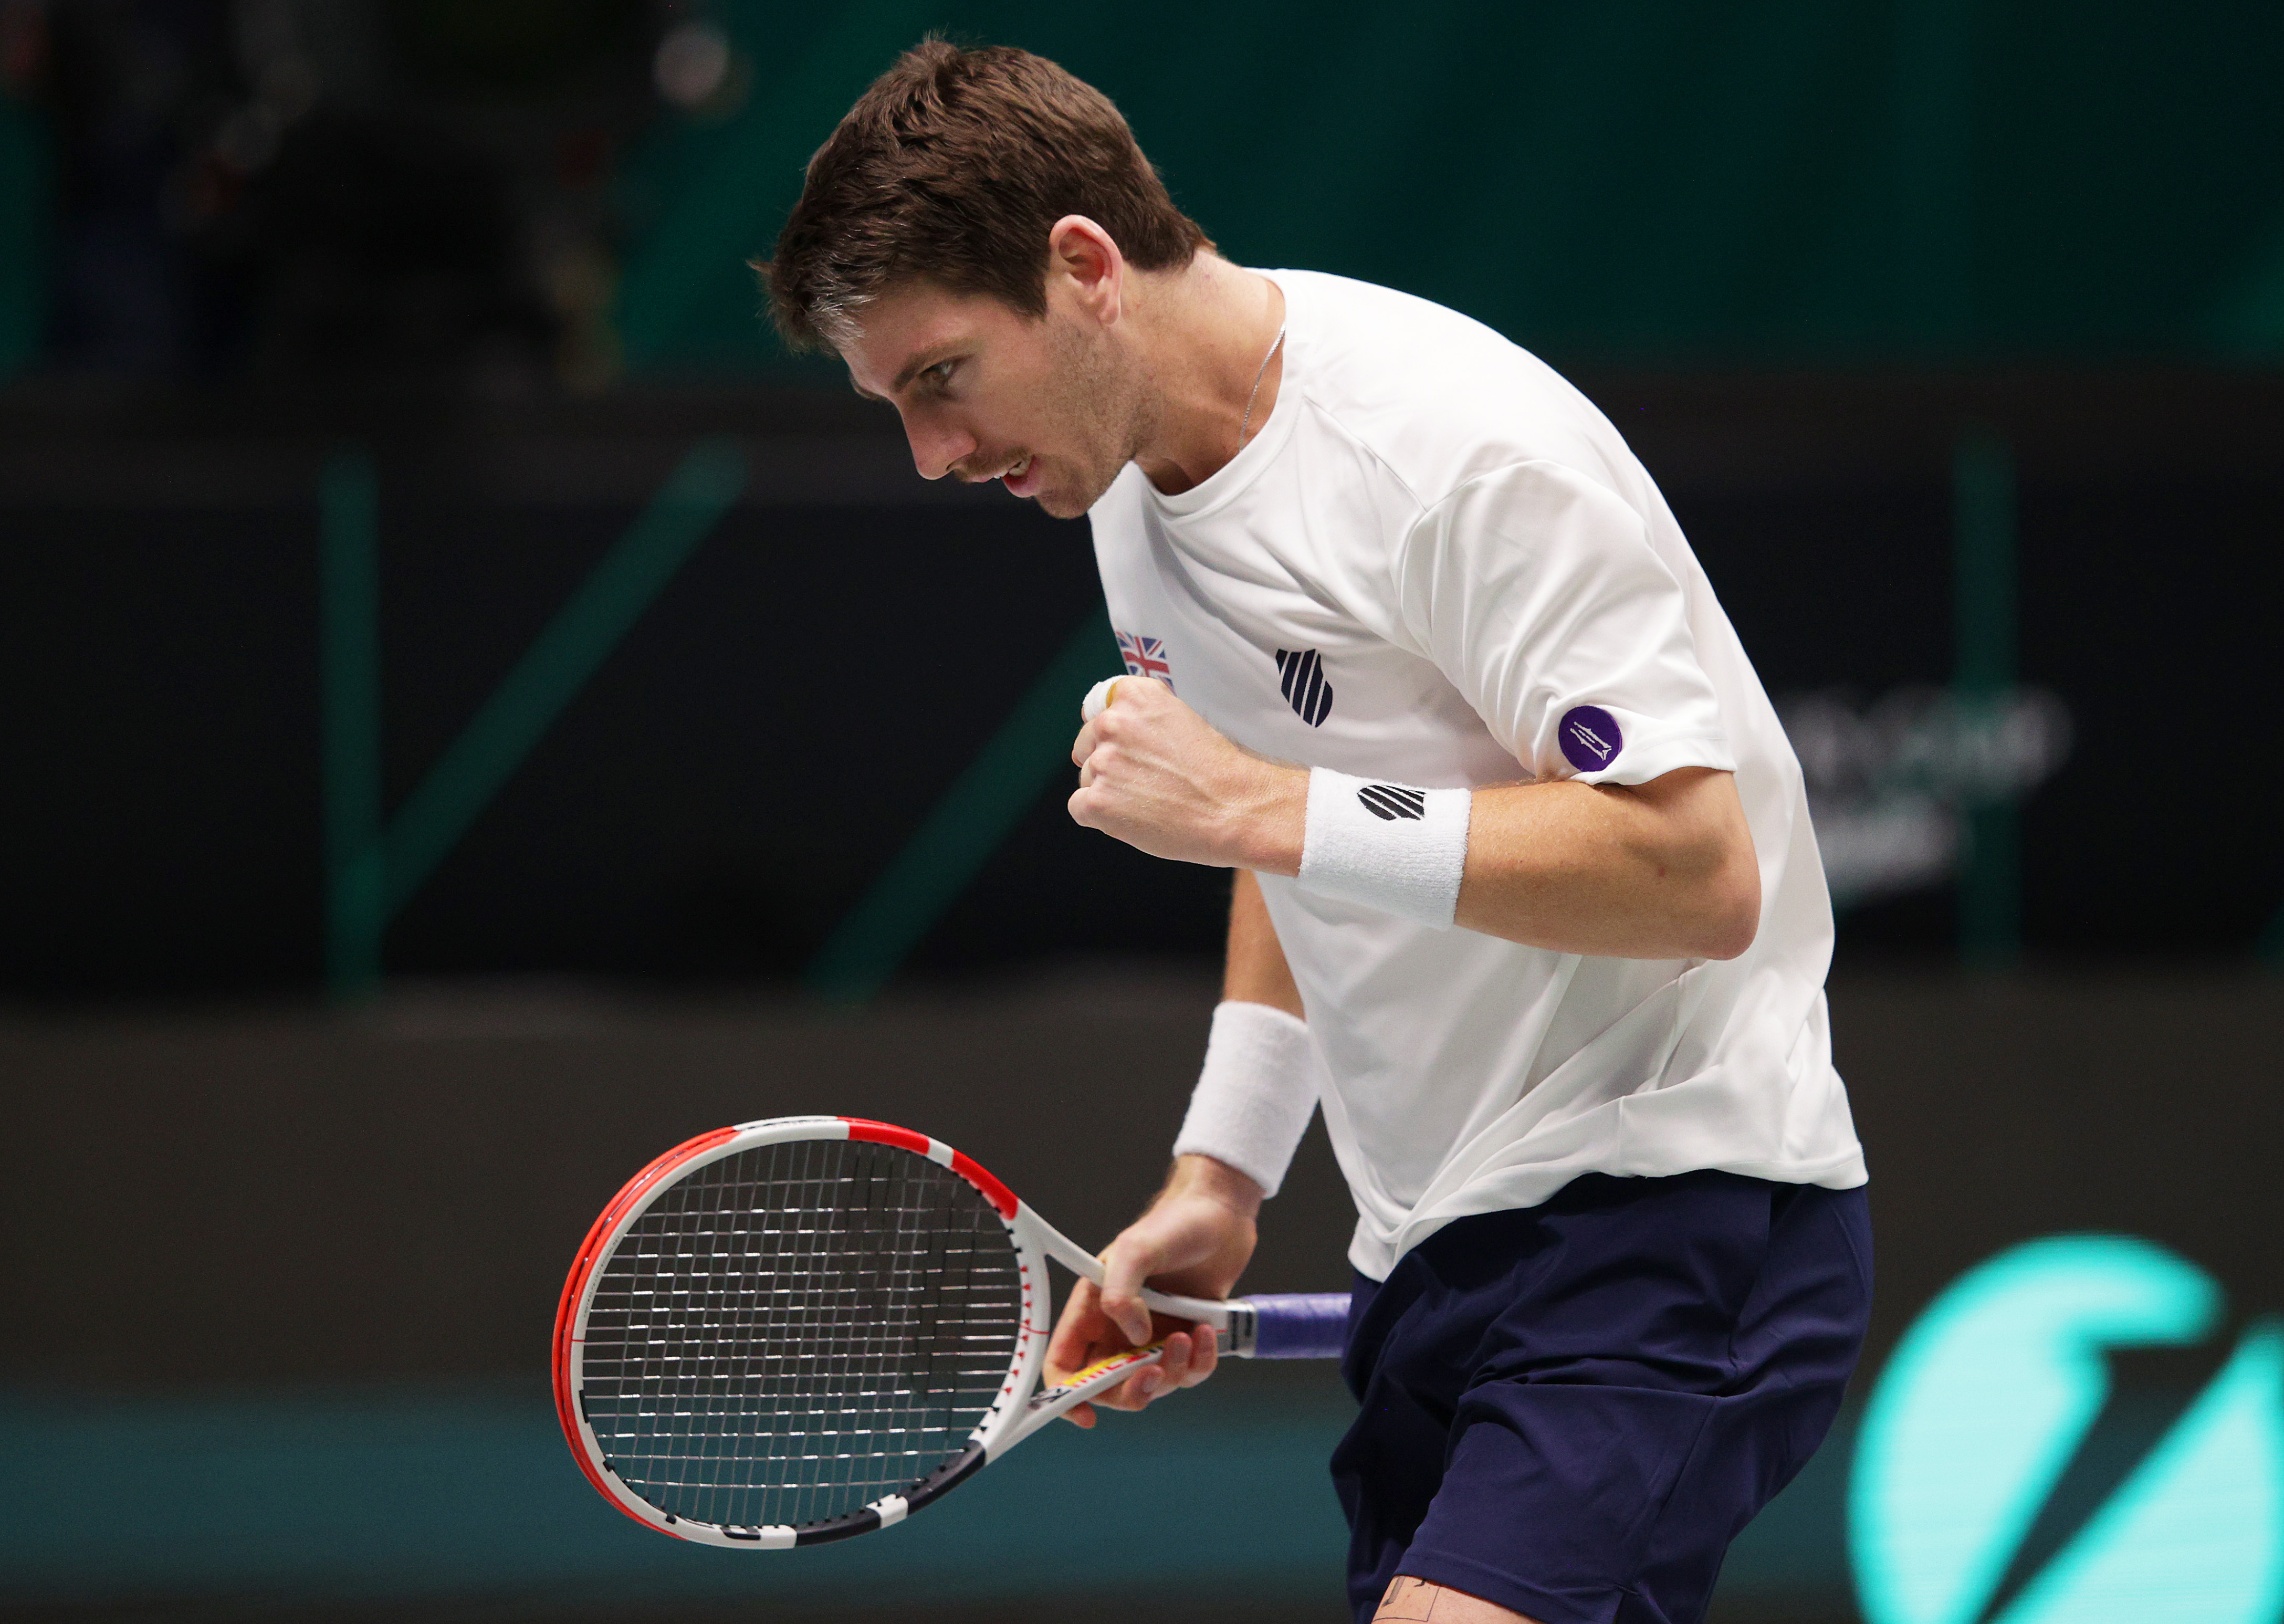 Davis Cup Finals 2021 Results Saturdays Round Robin Scores and Reaction News, Scores, Highlights, Stats, and Rumors Bleacher Report